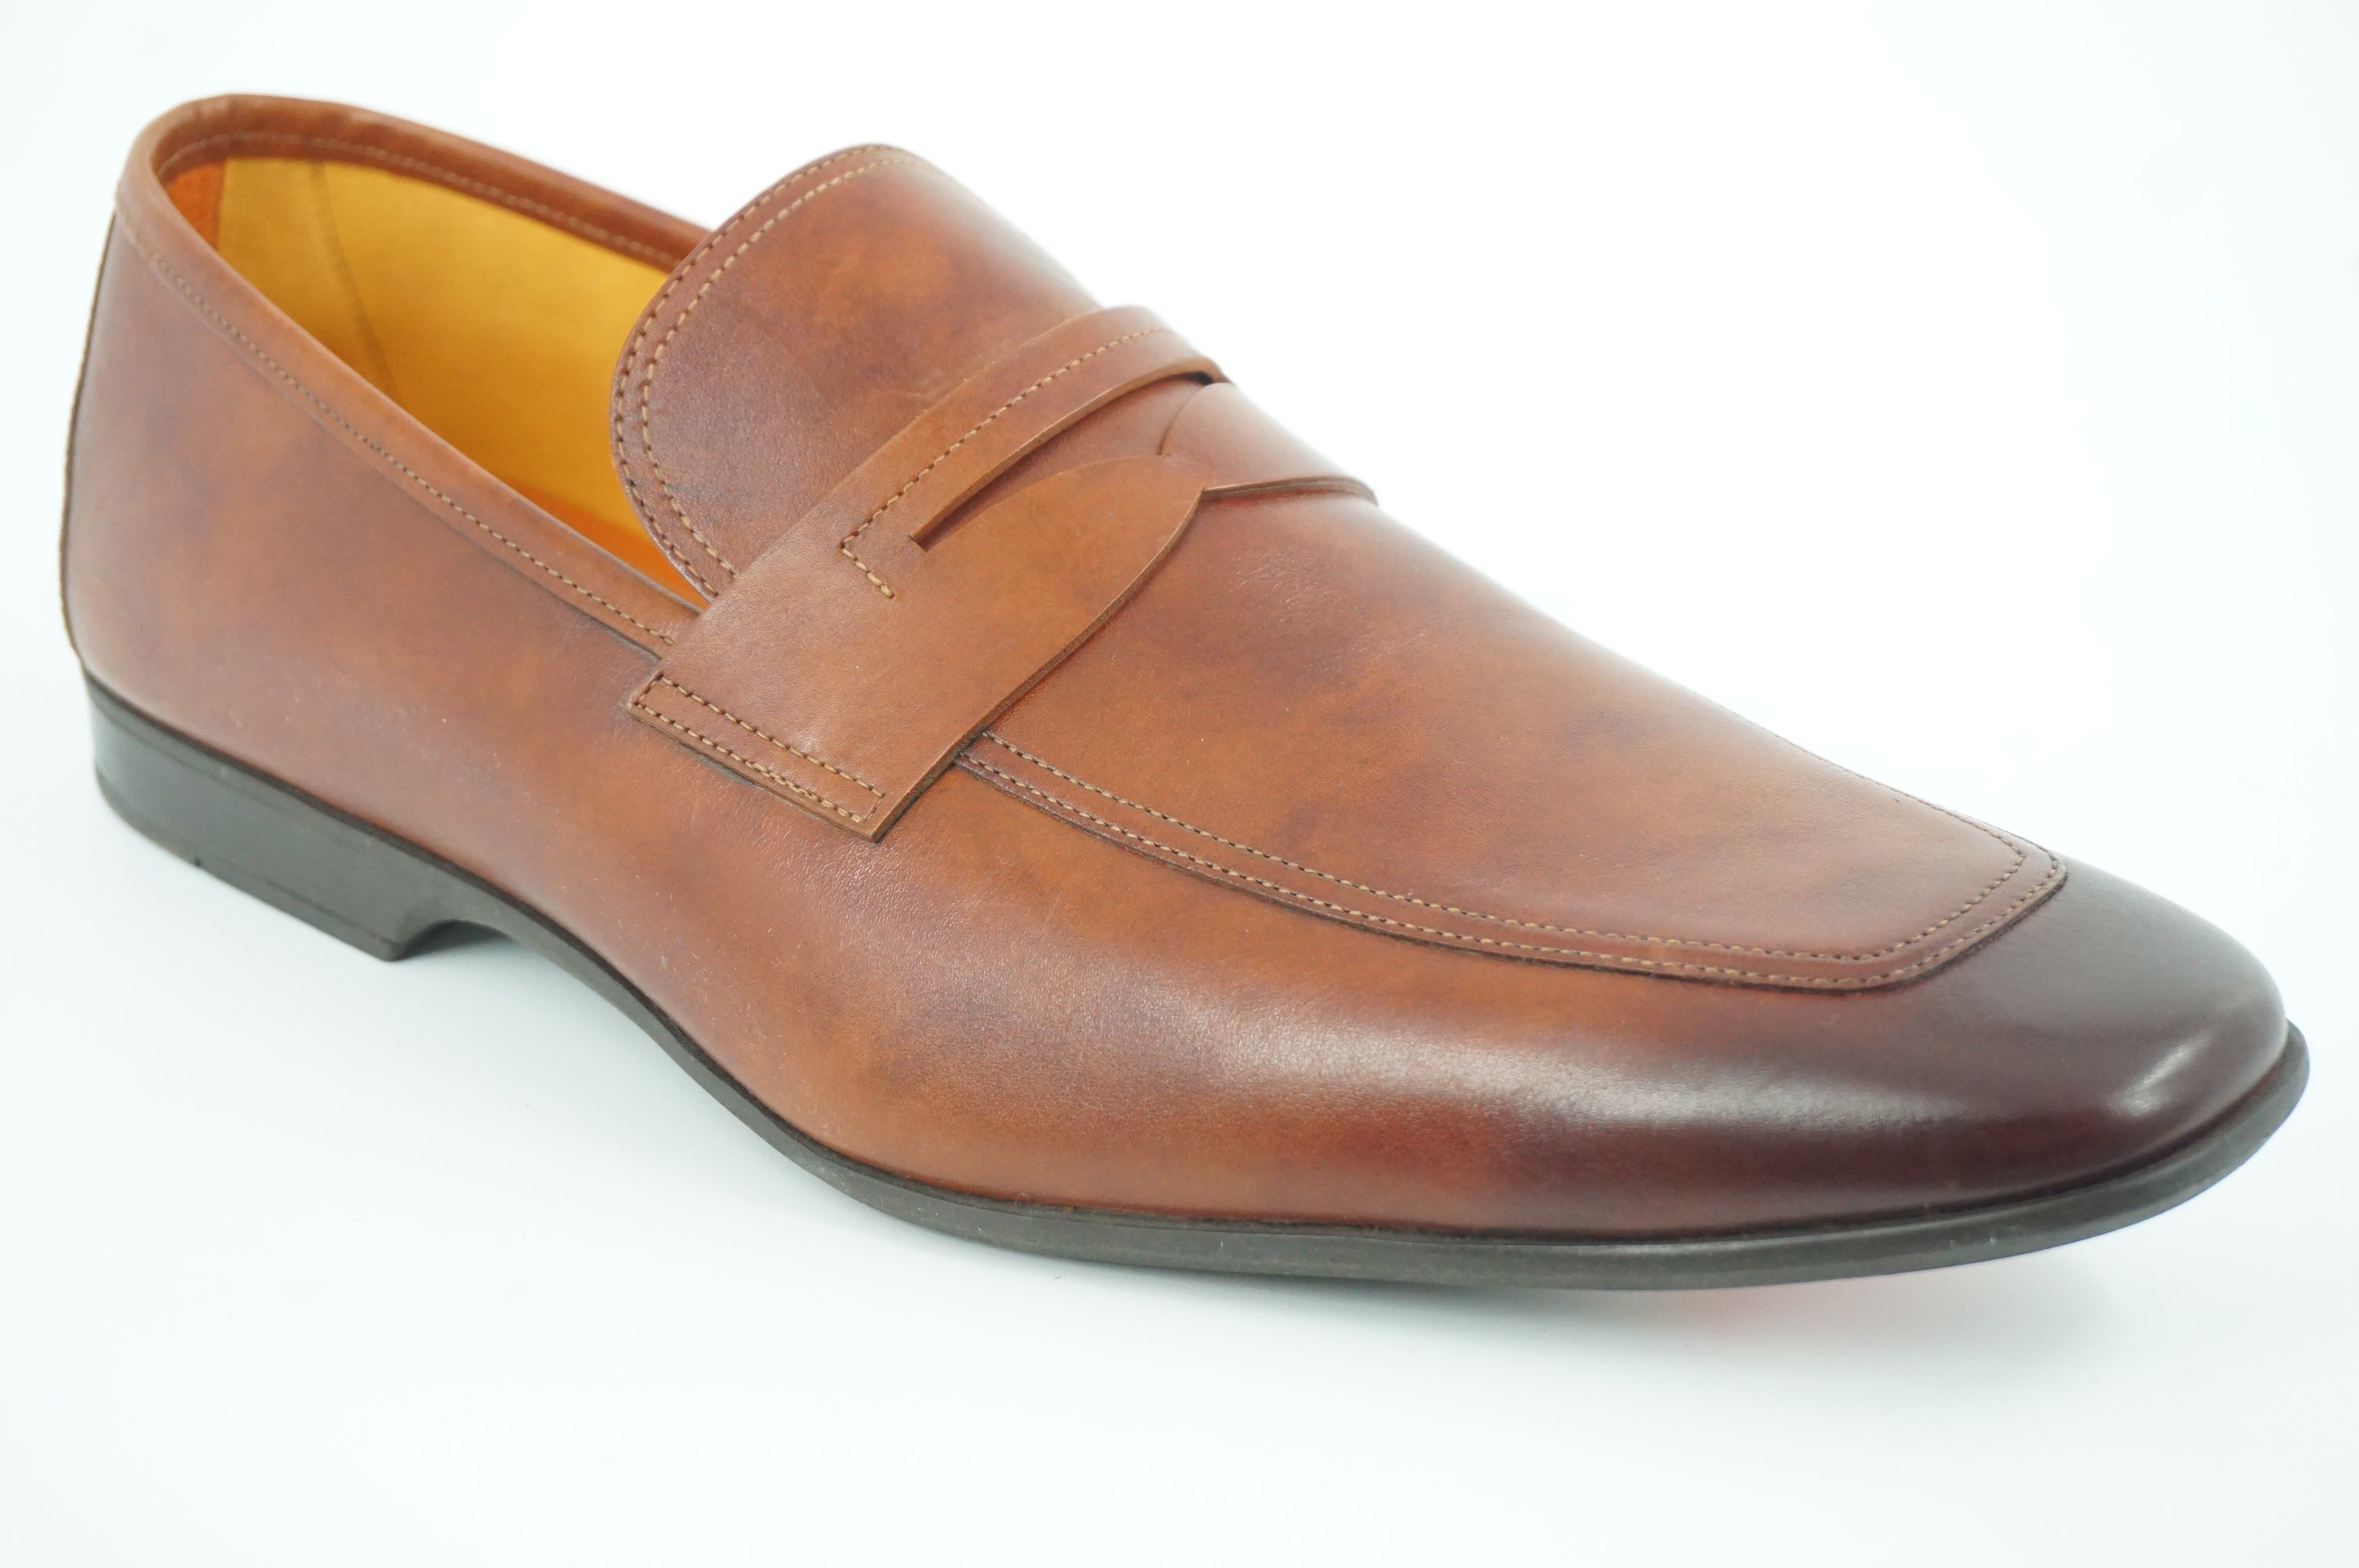 Magnanni Vale Penny Loafers Men's Dress Shoes SZ 13 Brown Leather $350 NIB